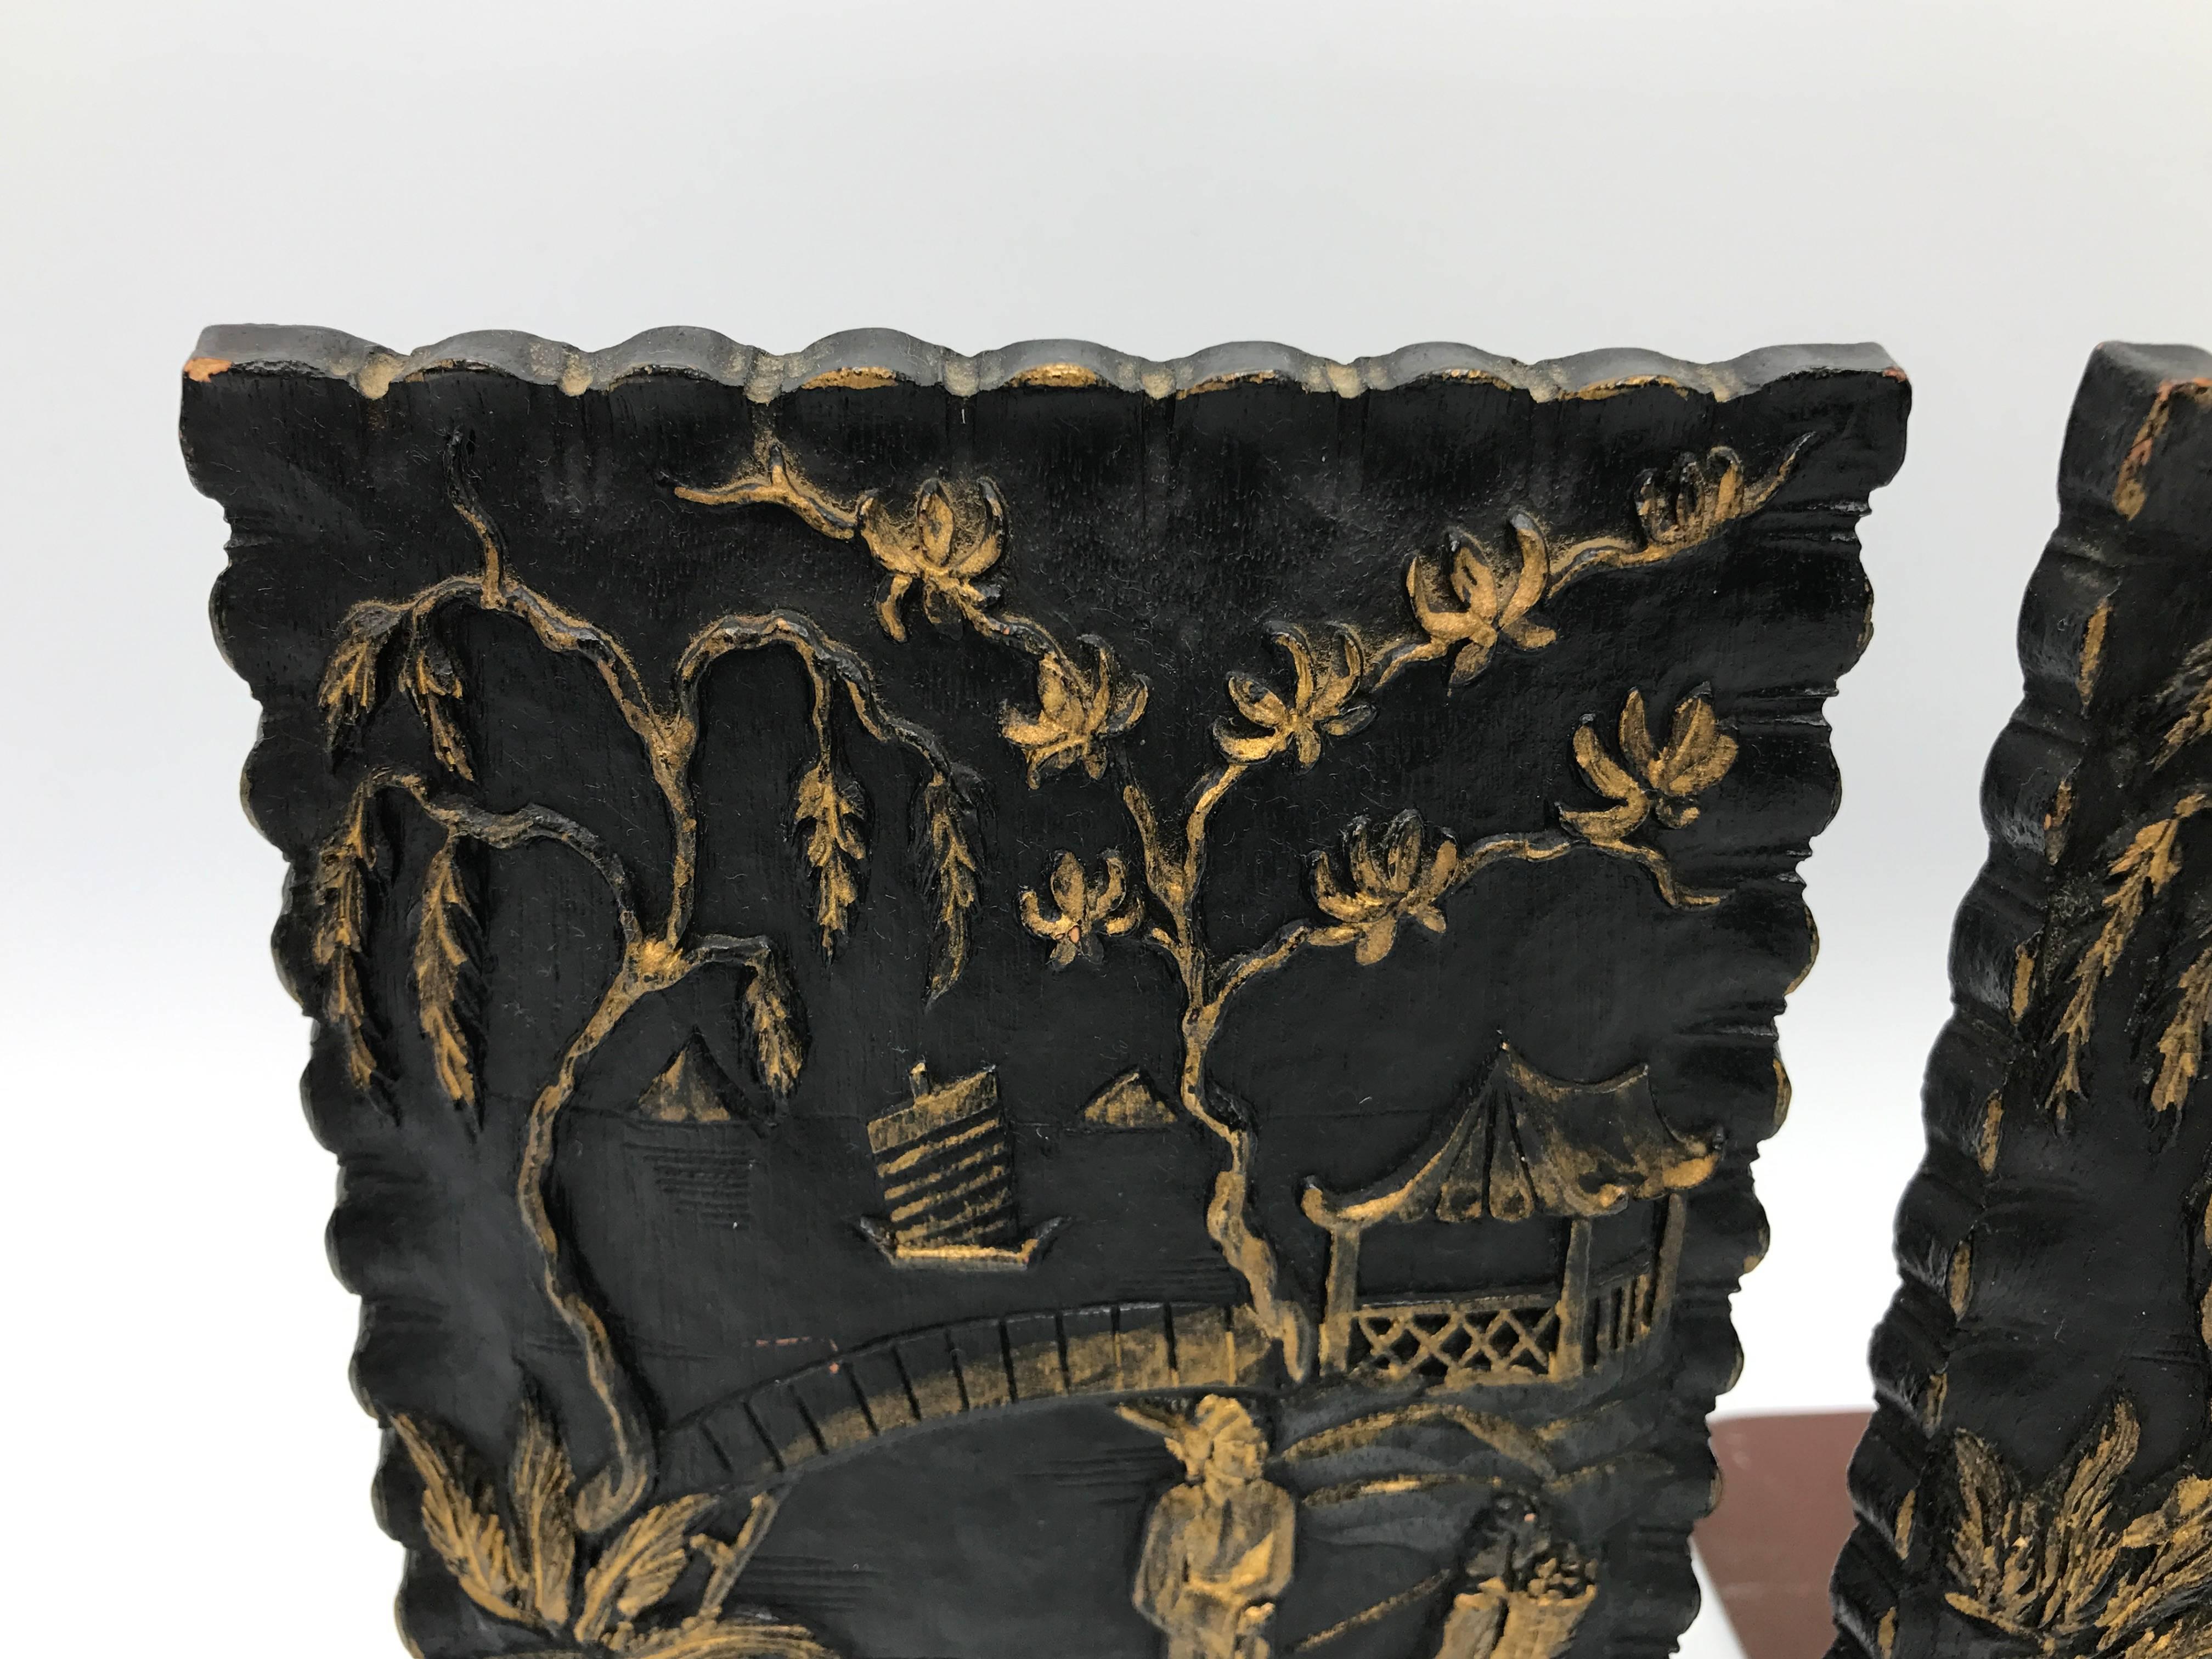 Offered is a gorgeous pair of 1920s, black and gold Asian bookends. The material seems to be a hardened leather with gilt accents.